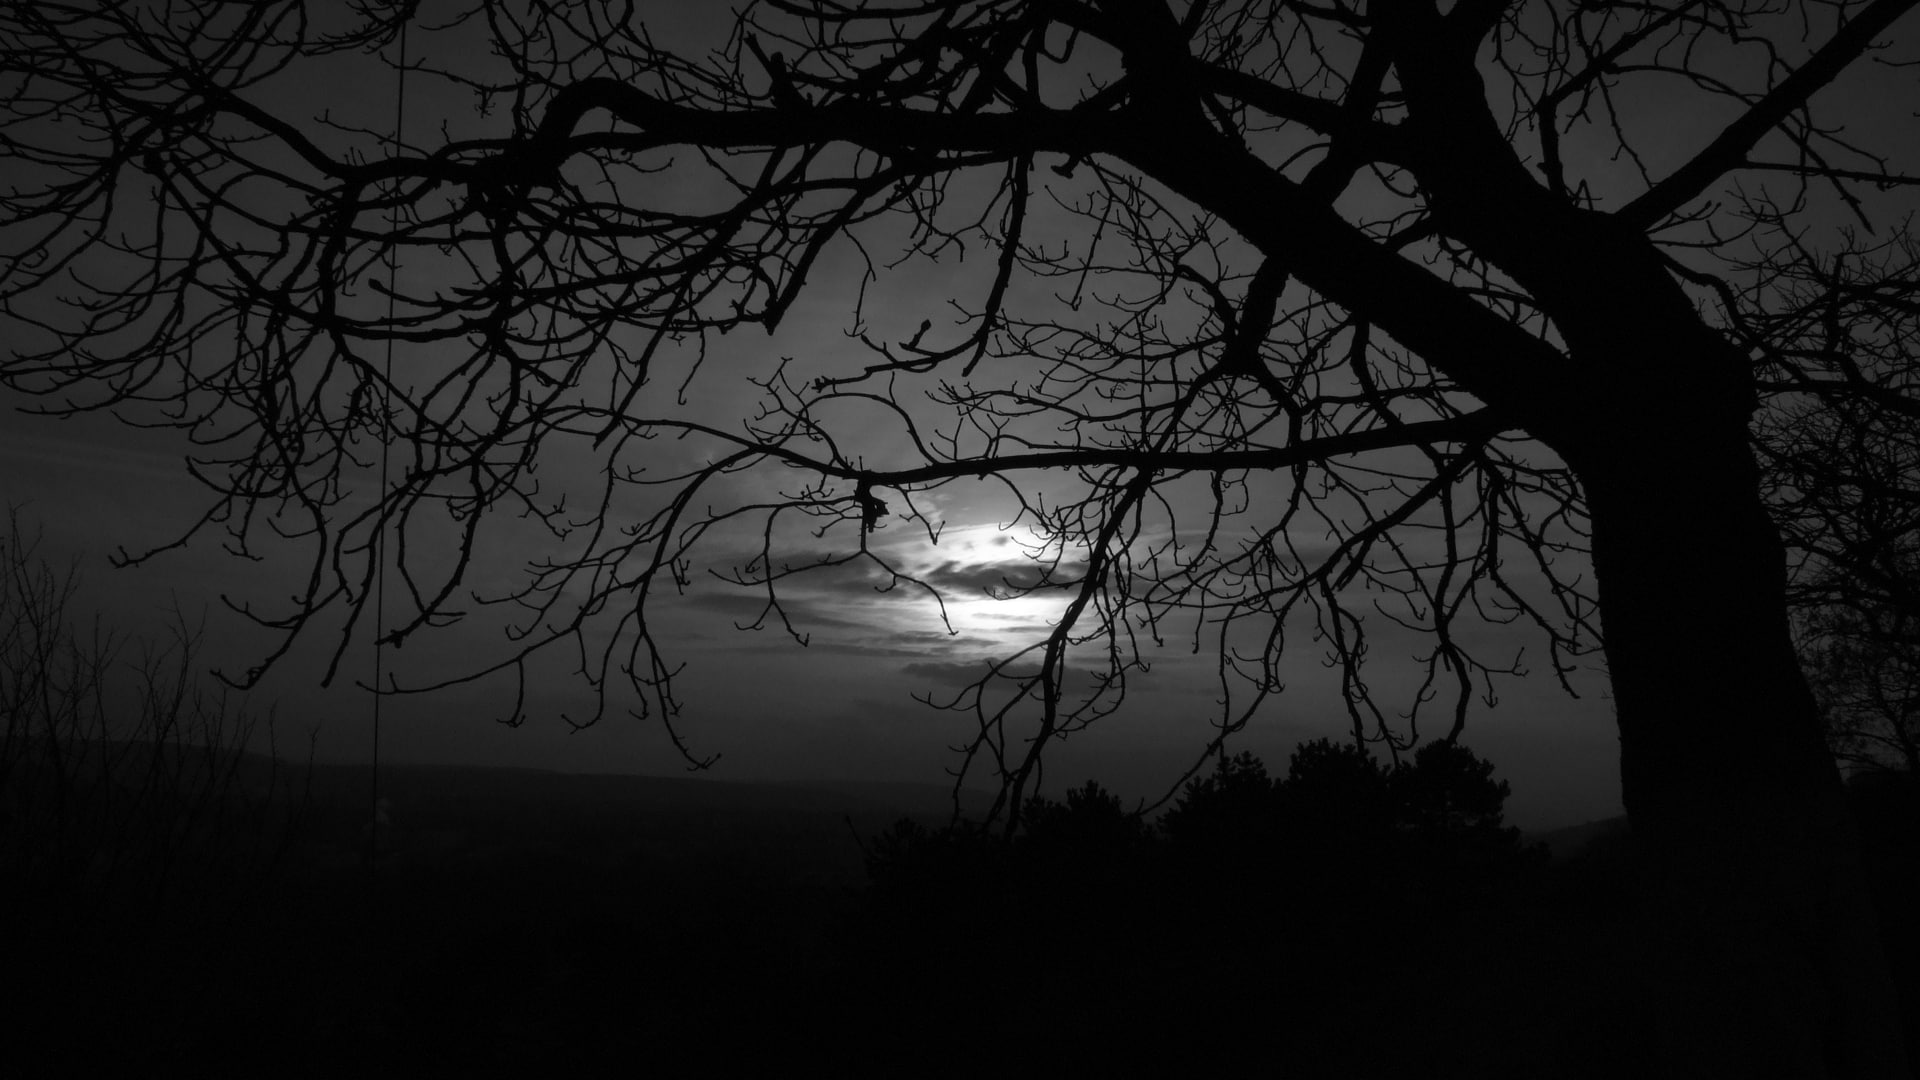 Shadow Moon Clouds Dark BW HD, silhouette photo of tree, nature